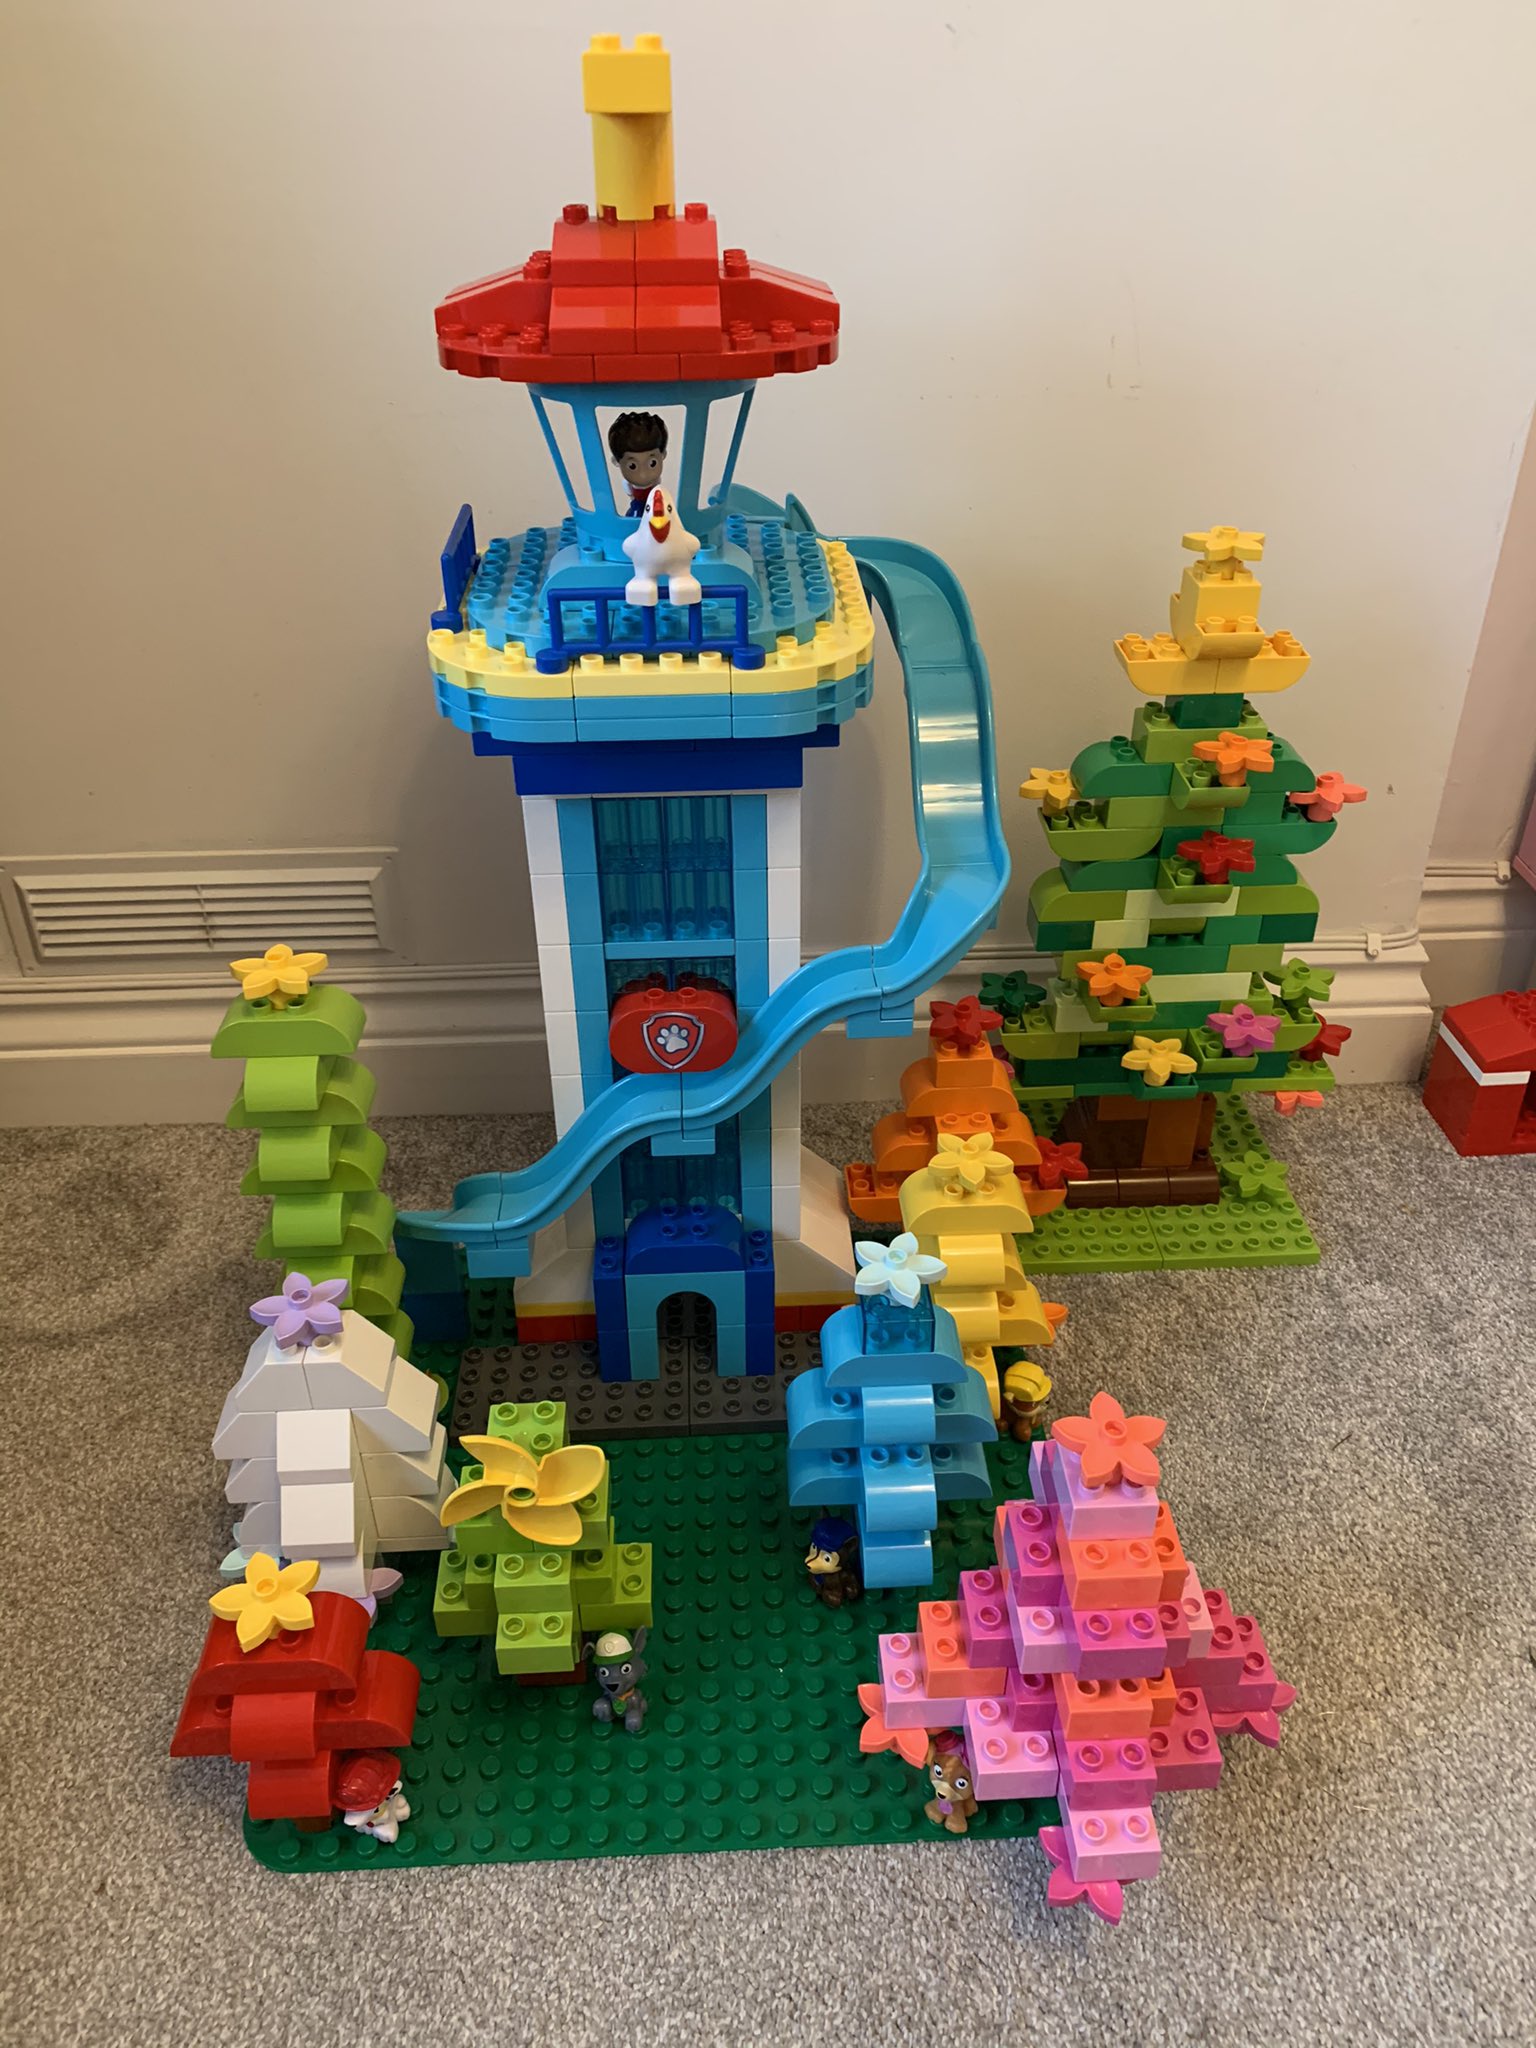 Lego Dad Labassi on Twitter: "The pups have for their Christmas trees up! Patrol is on a roll! #Lego #Duplo #PawPatrol #LookoutTower #Christmas #ChristmasTree #LegoIdeas #PawPatrolChristmas https://t.co/BWQCcKVu6w" / Twitter